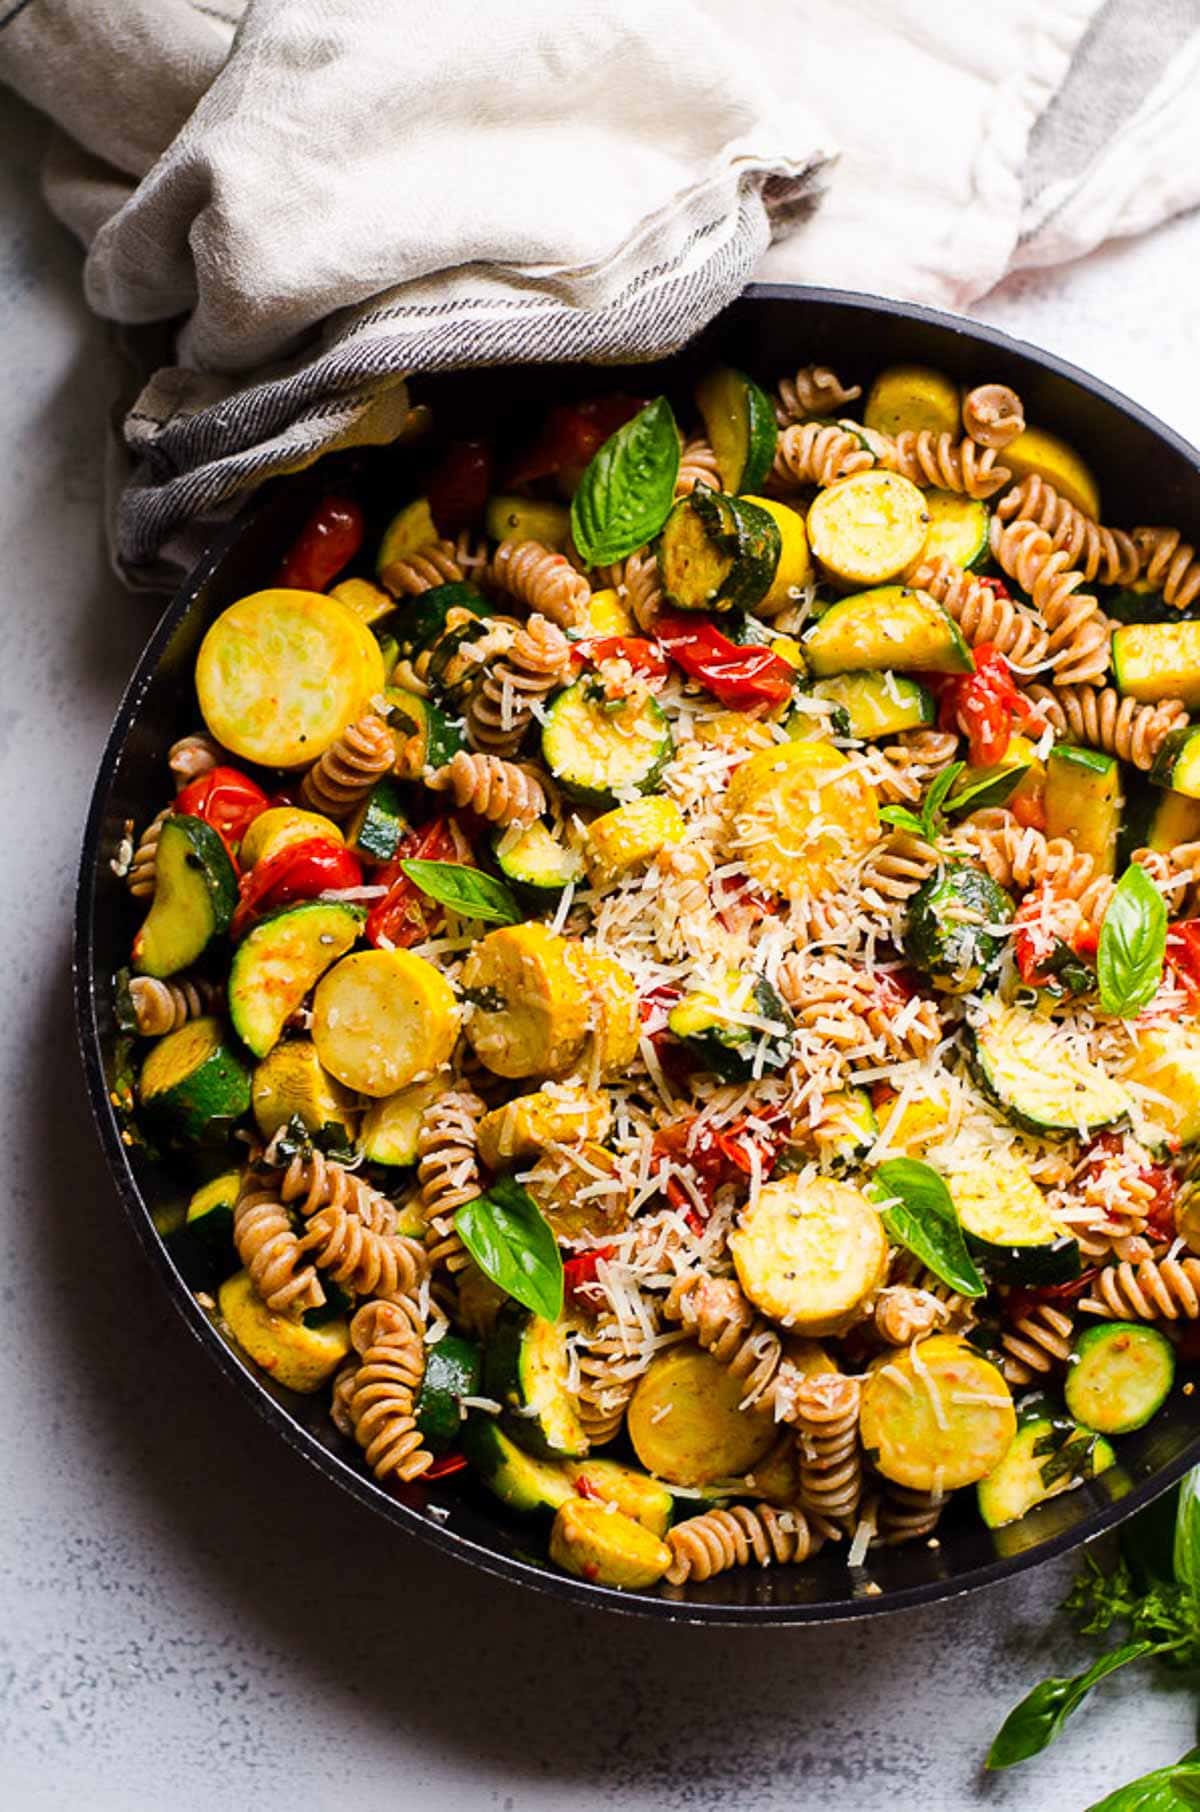 Pasta with zucchini, tomatoes, parmesan cheese and fresh basil in a skillet.